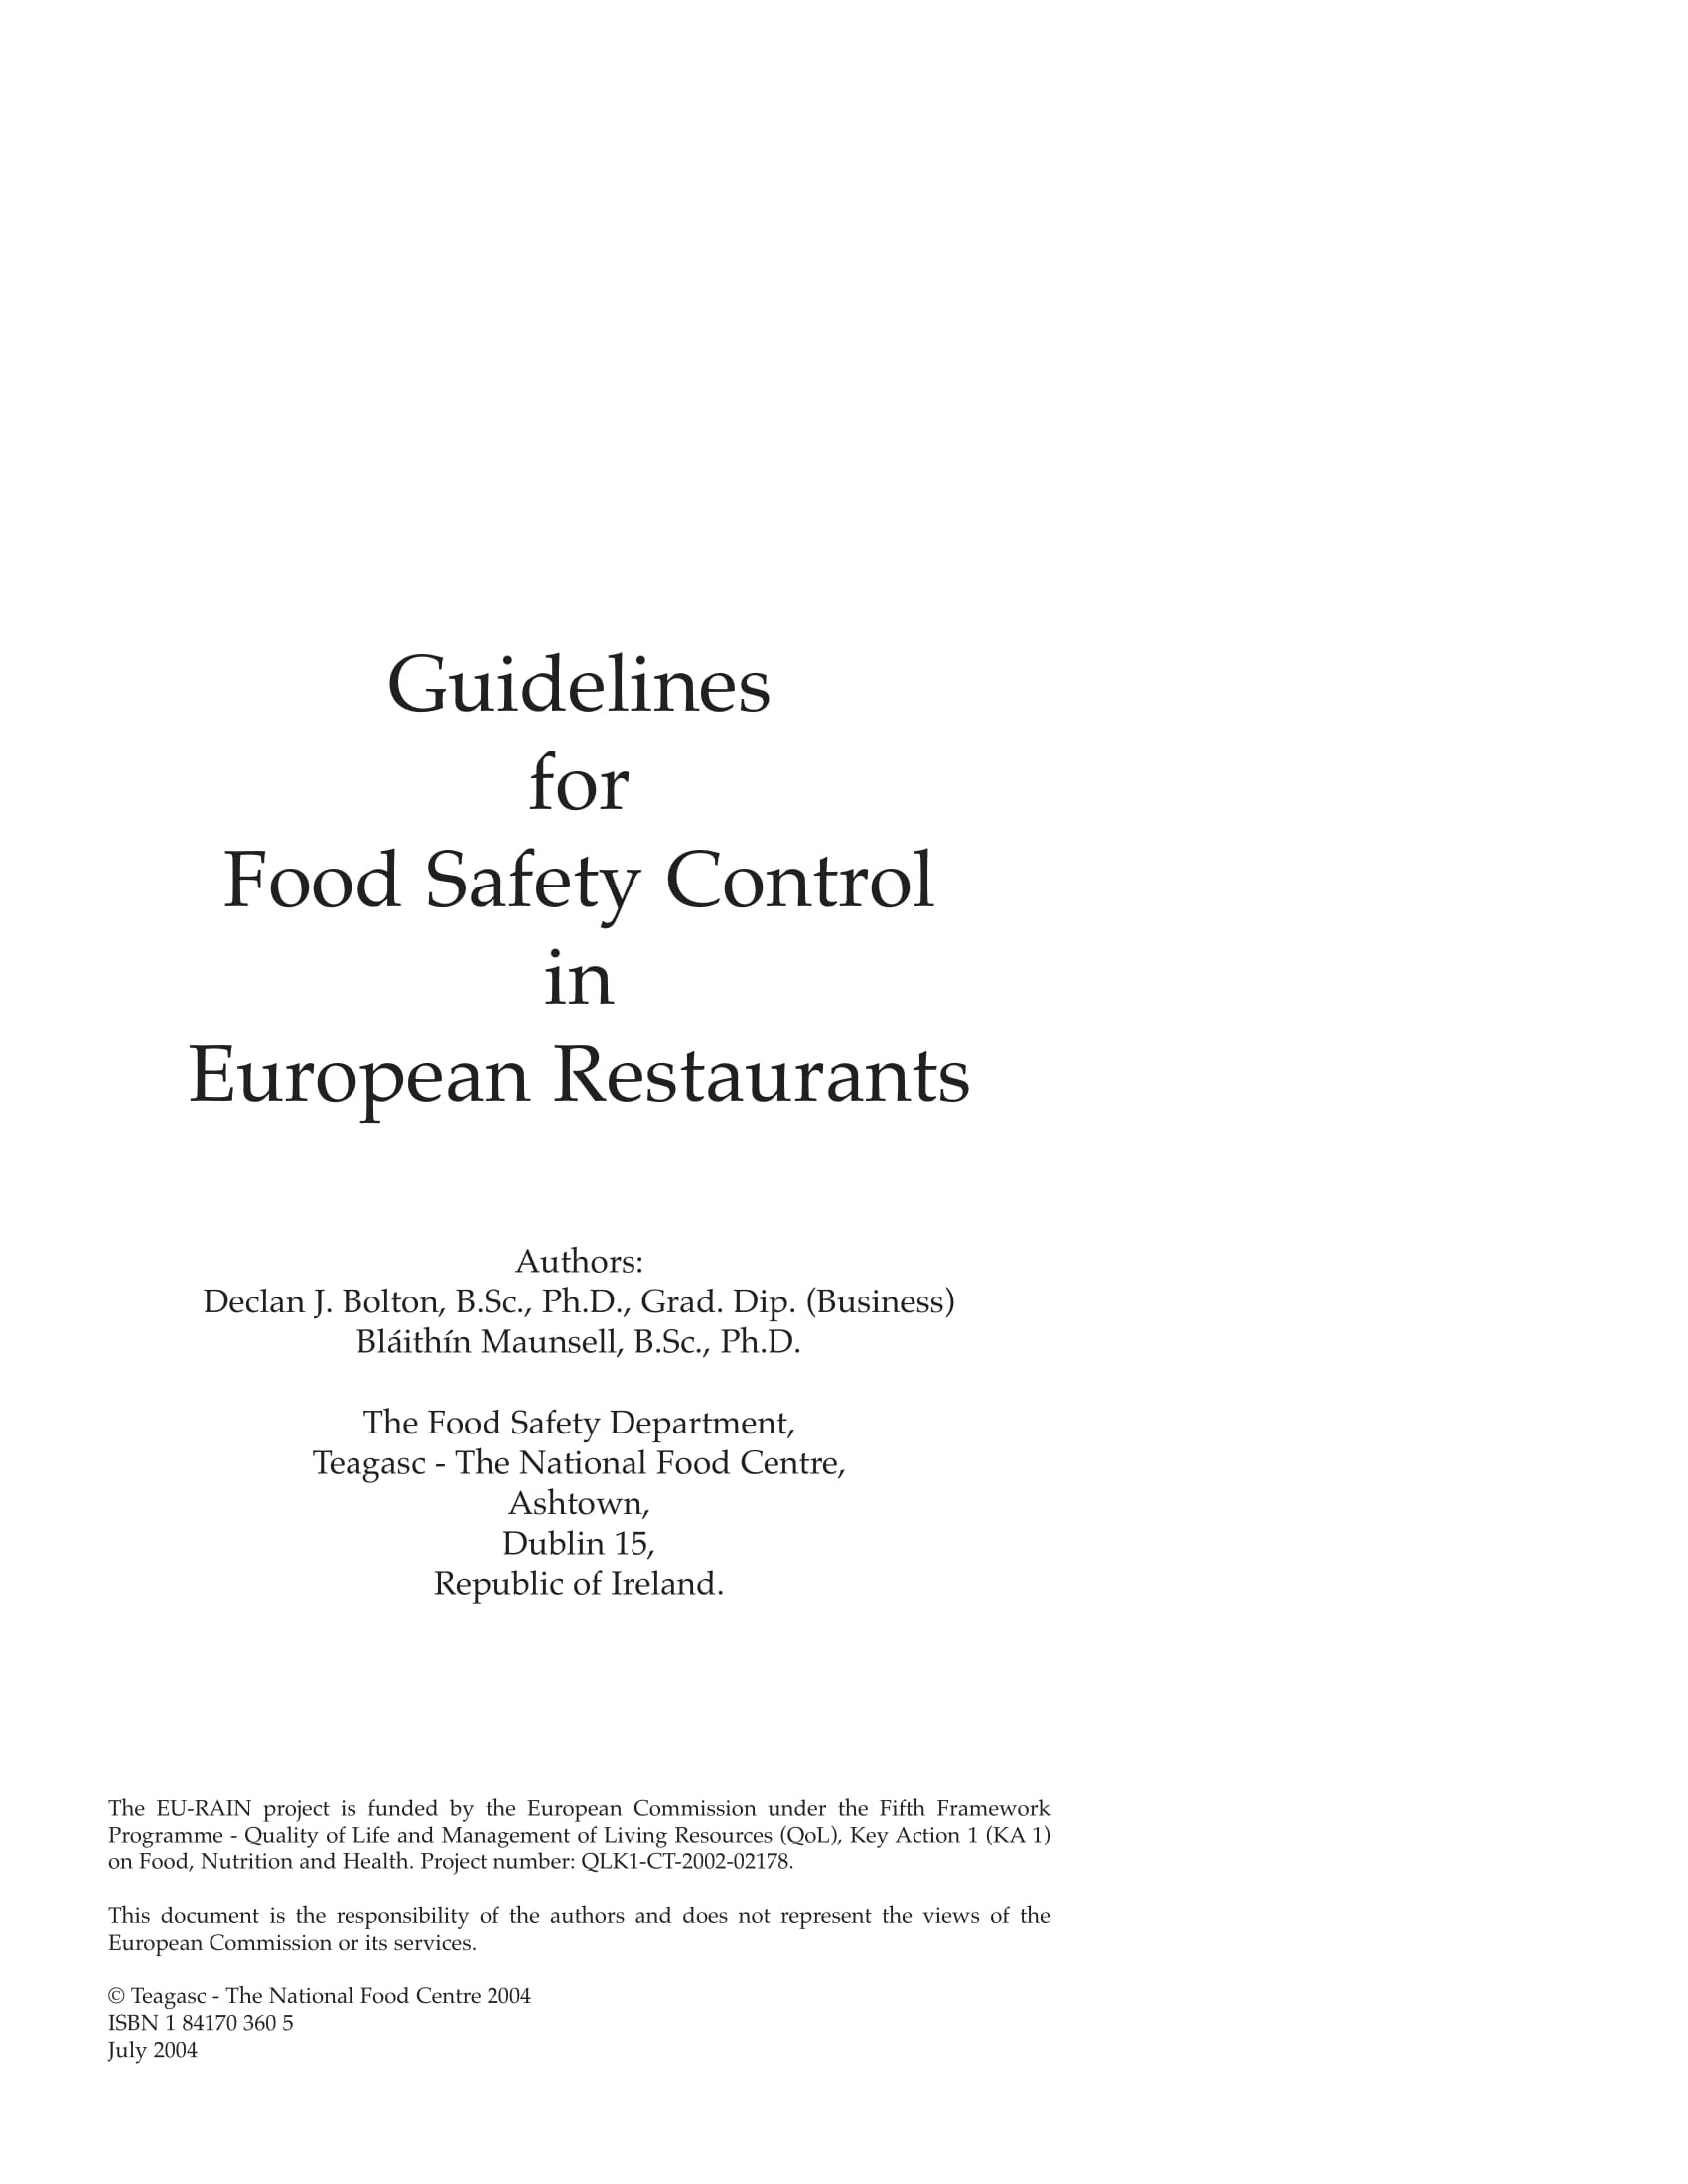 haccp hazard analysis for food safety control example 01